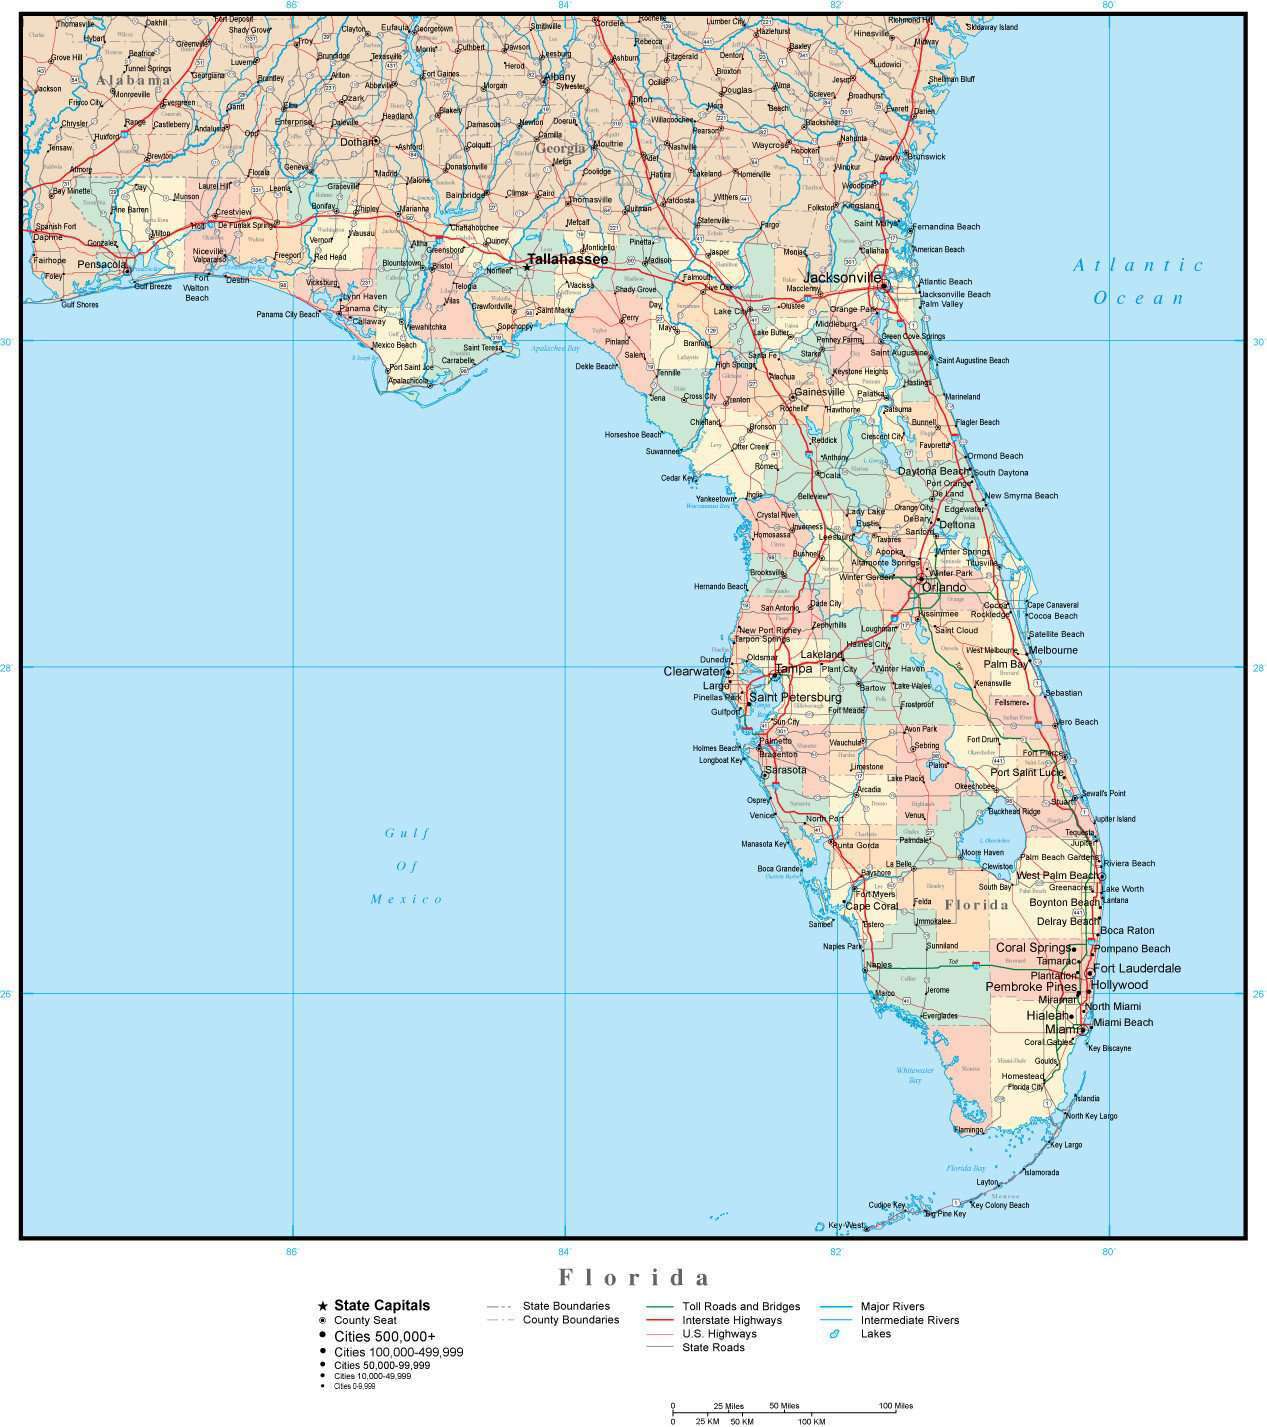 florida-adobe-illustrator-map-with-counties-cities-county-seats-major-roads-map-resources